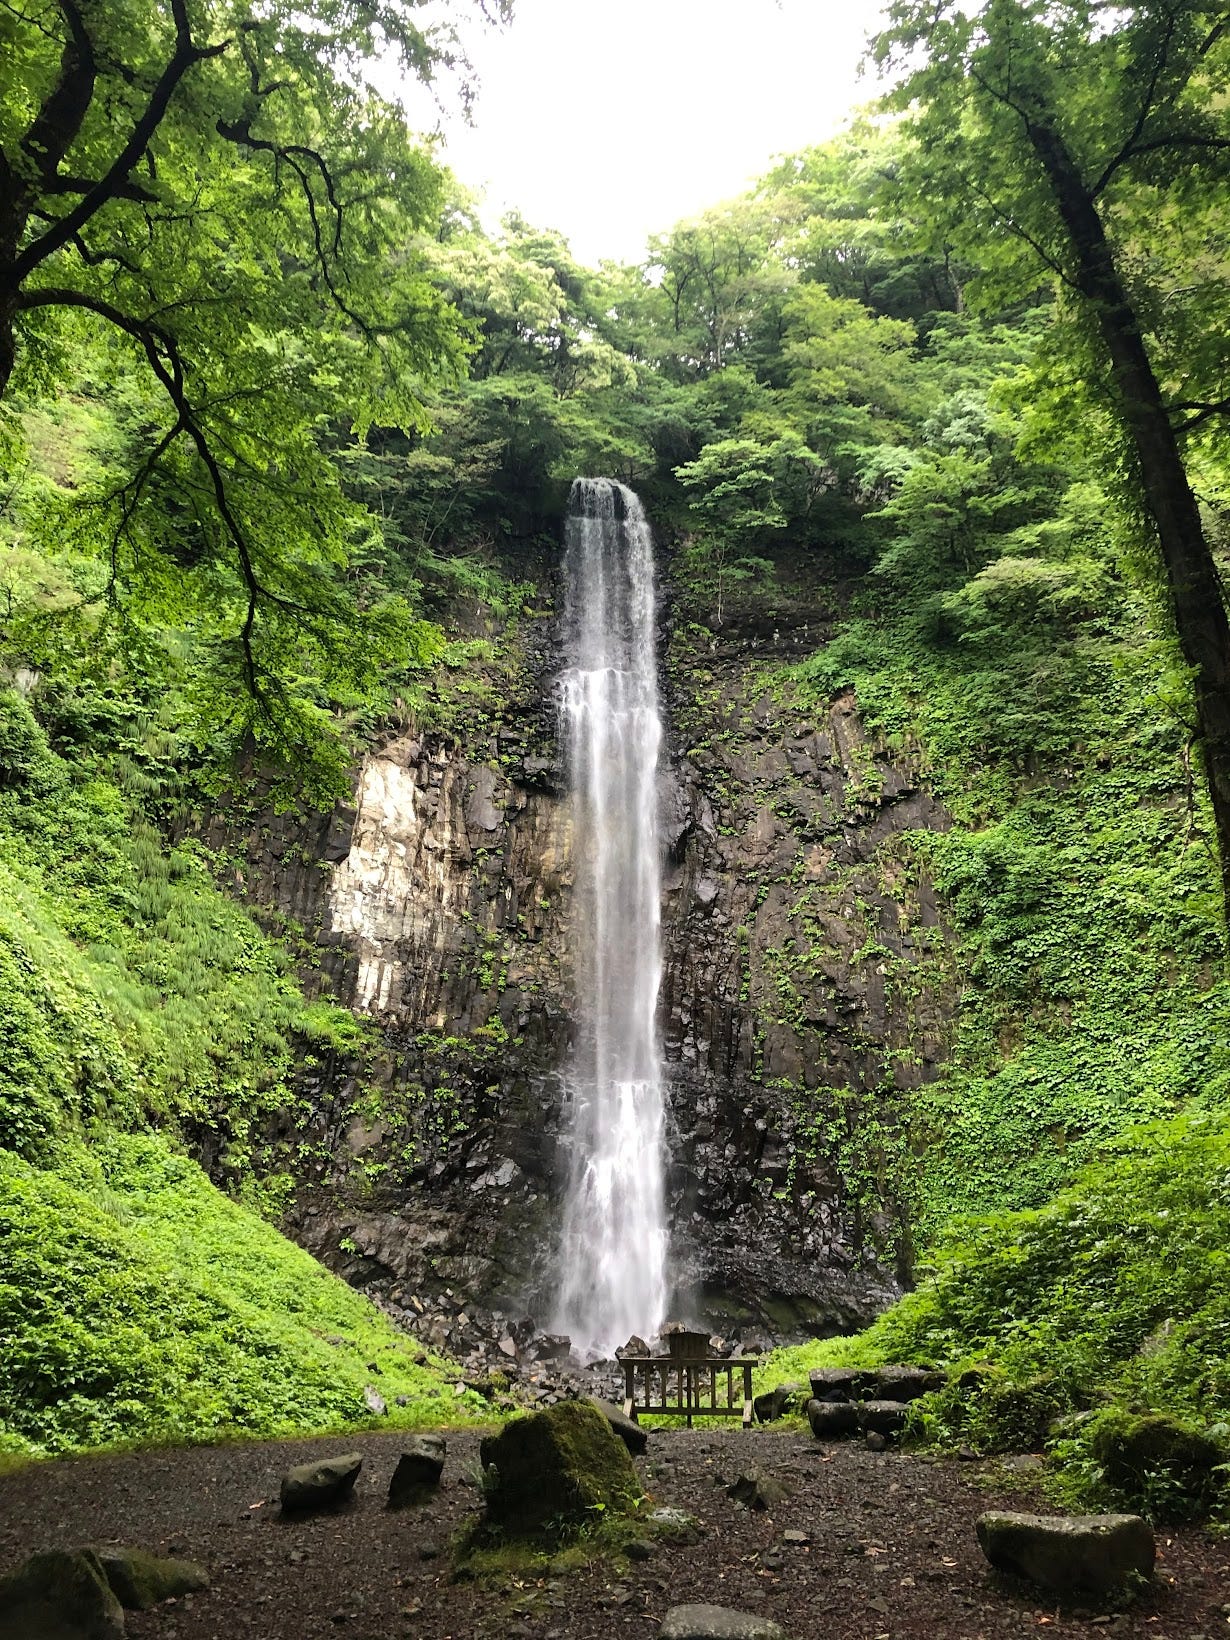 The huge 63 m drop of Tamasudare Falls in Sakata City, the tallest waterfall in Yamagata Prefecture, surrounded by the green leaves of summer